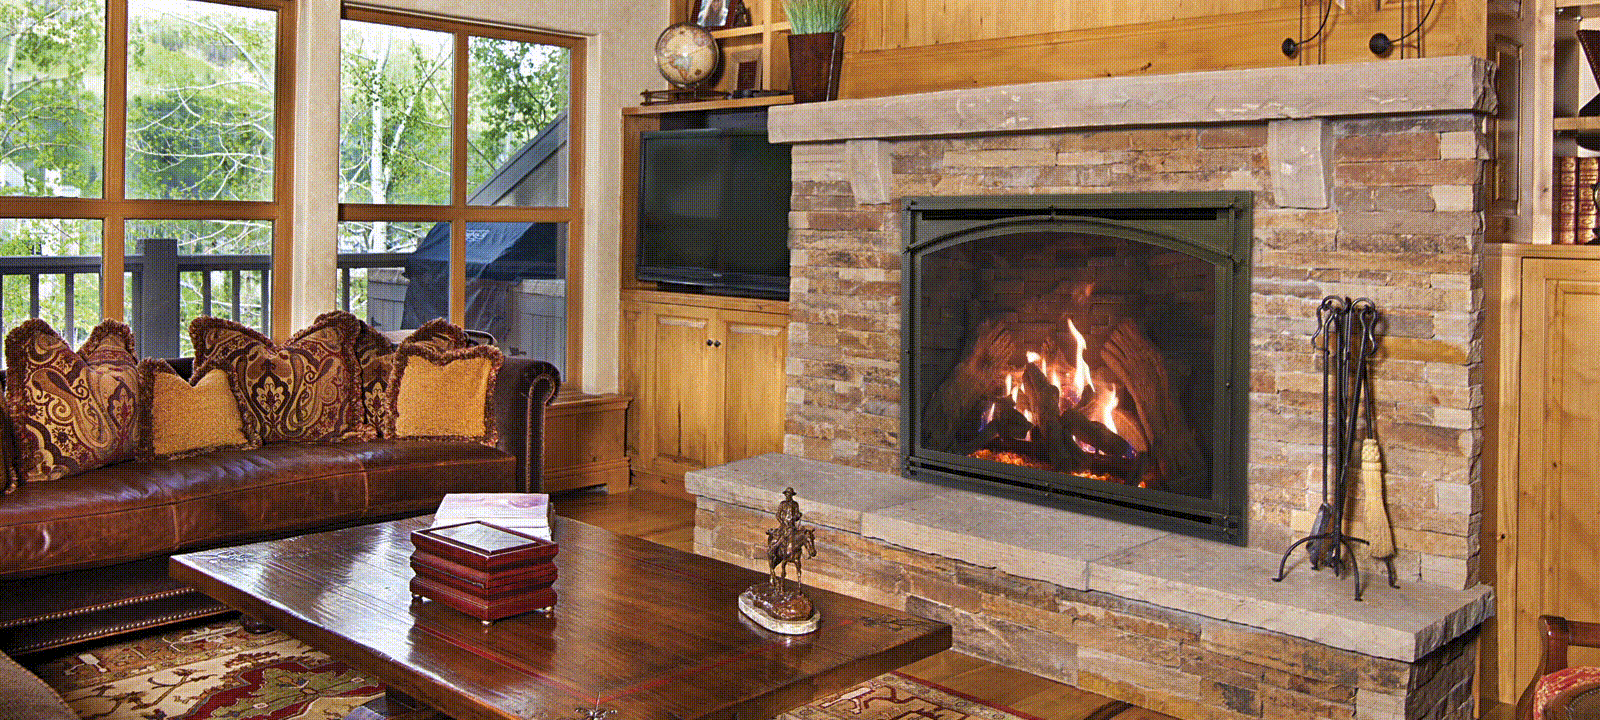 36inch Wood Burning Fireplace In Living Room